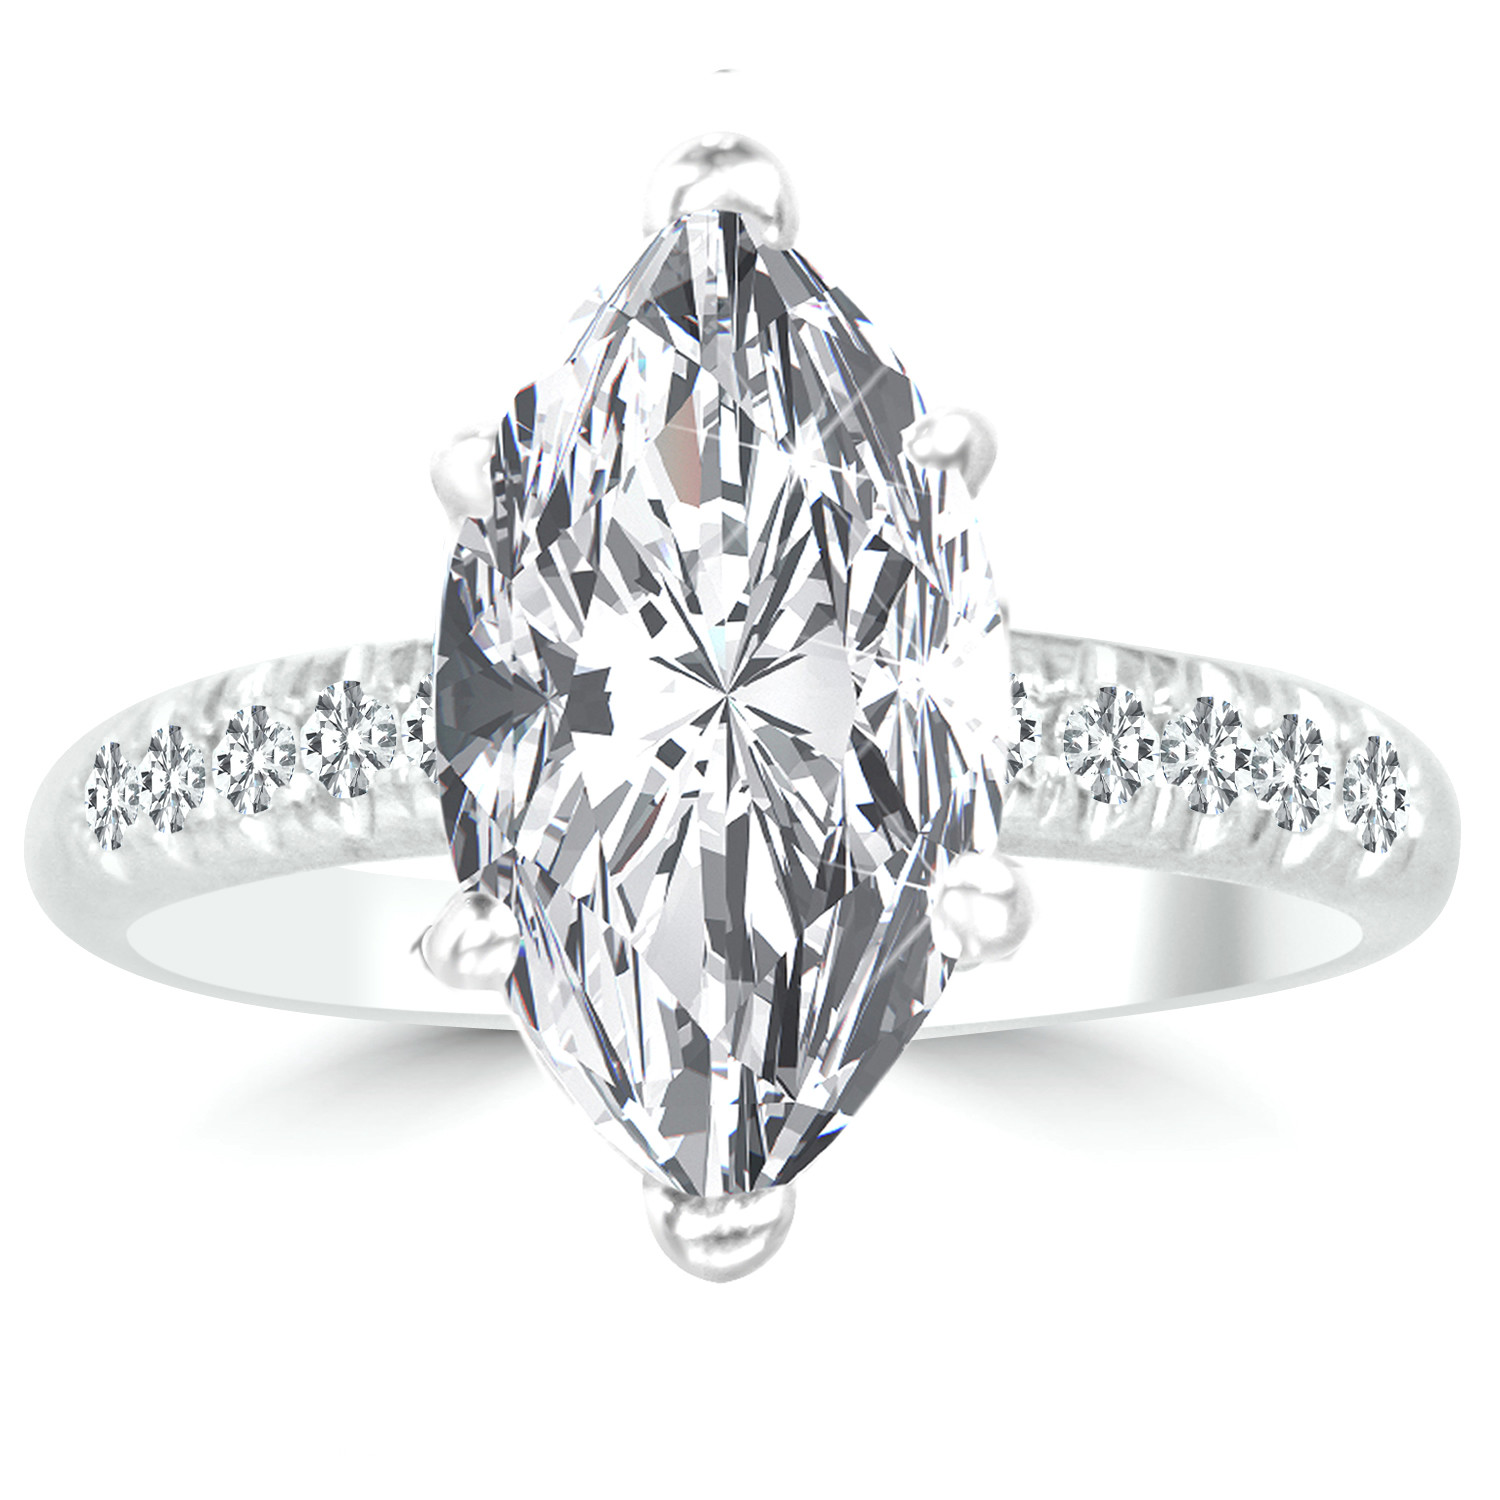 Marquise Diamond Engagement Ring
 2 23 Ct Marquise Cut Diamond Engagement Ring VS1 F 14K